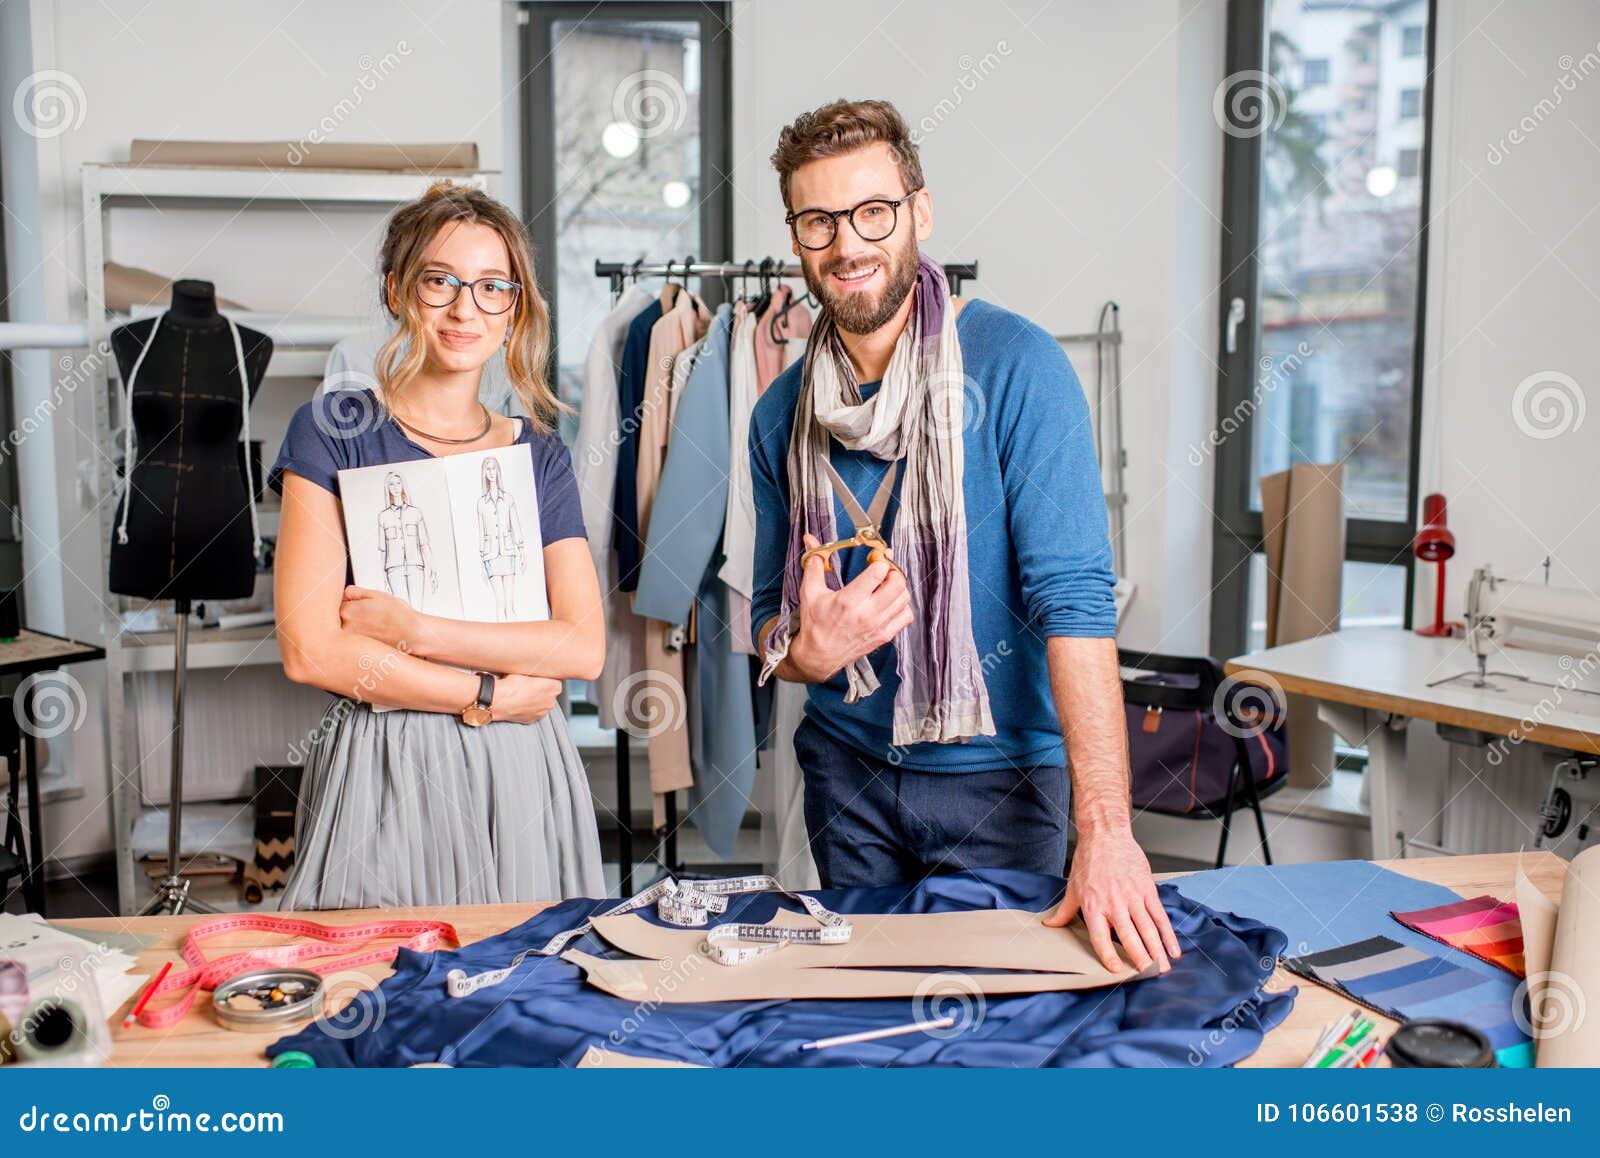 Couple of Fashion Designers Working at the Studio Stock Photo - Image ...